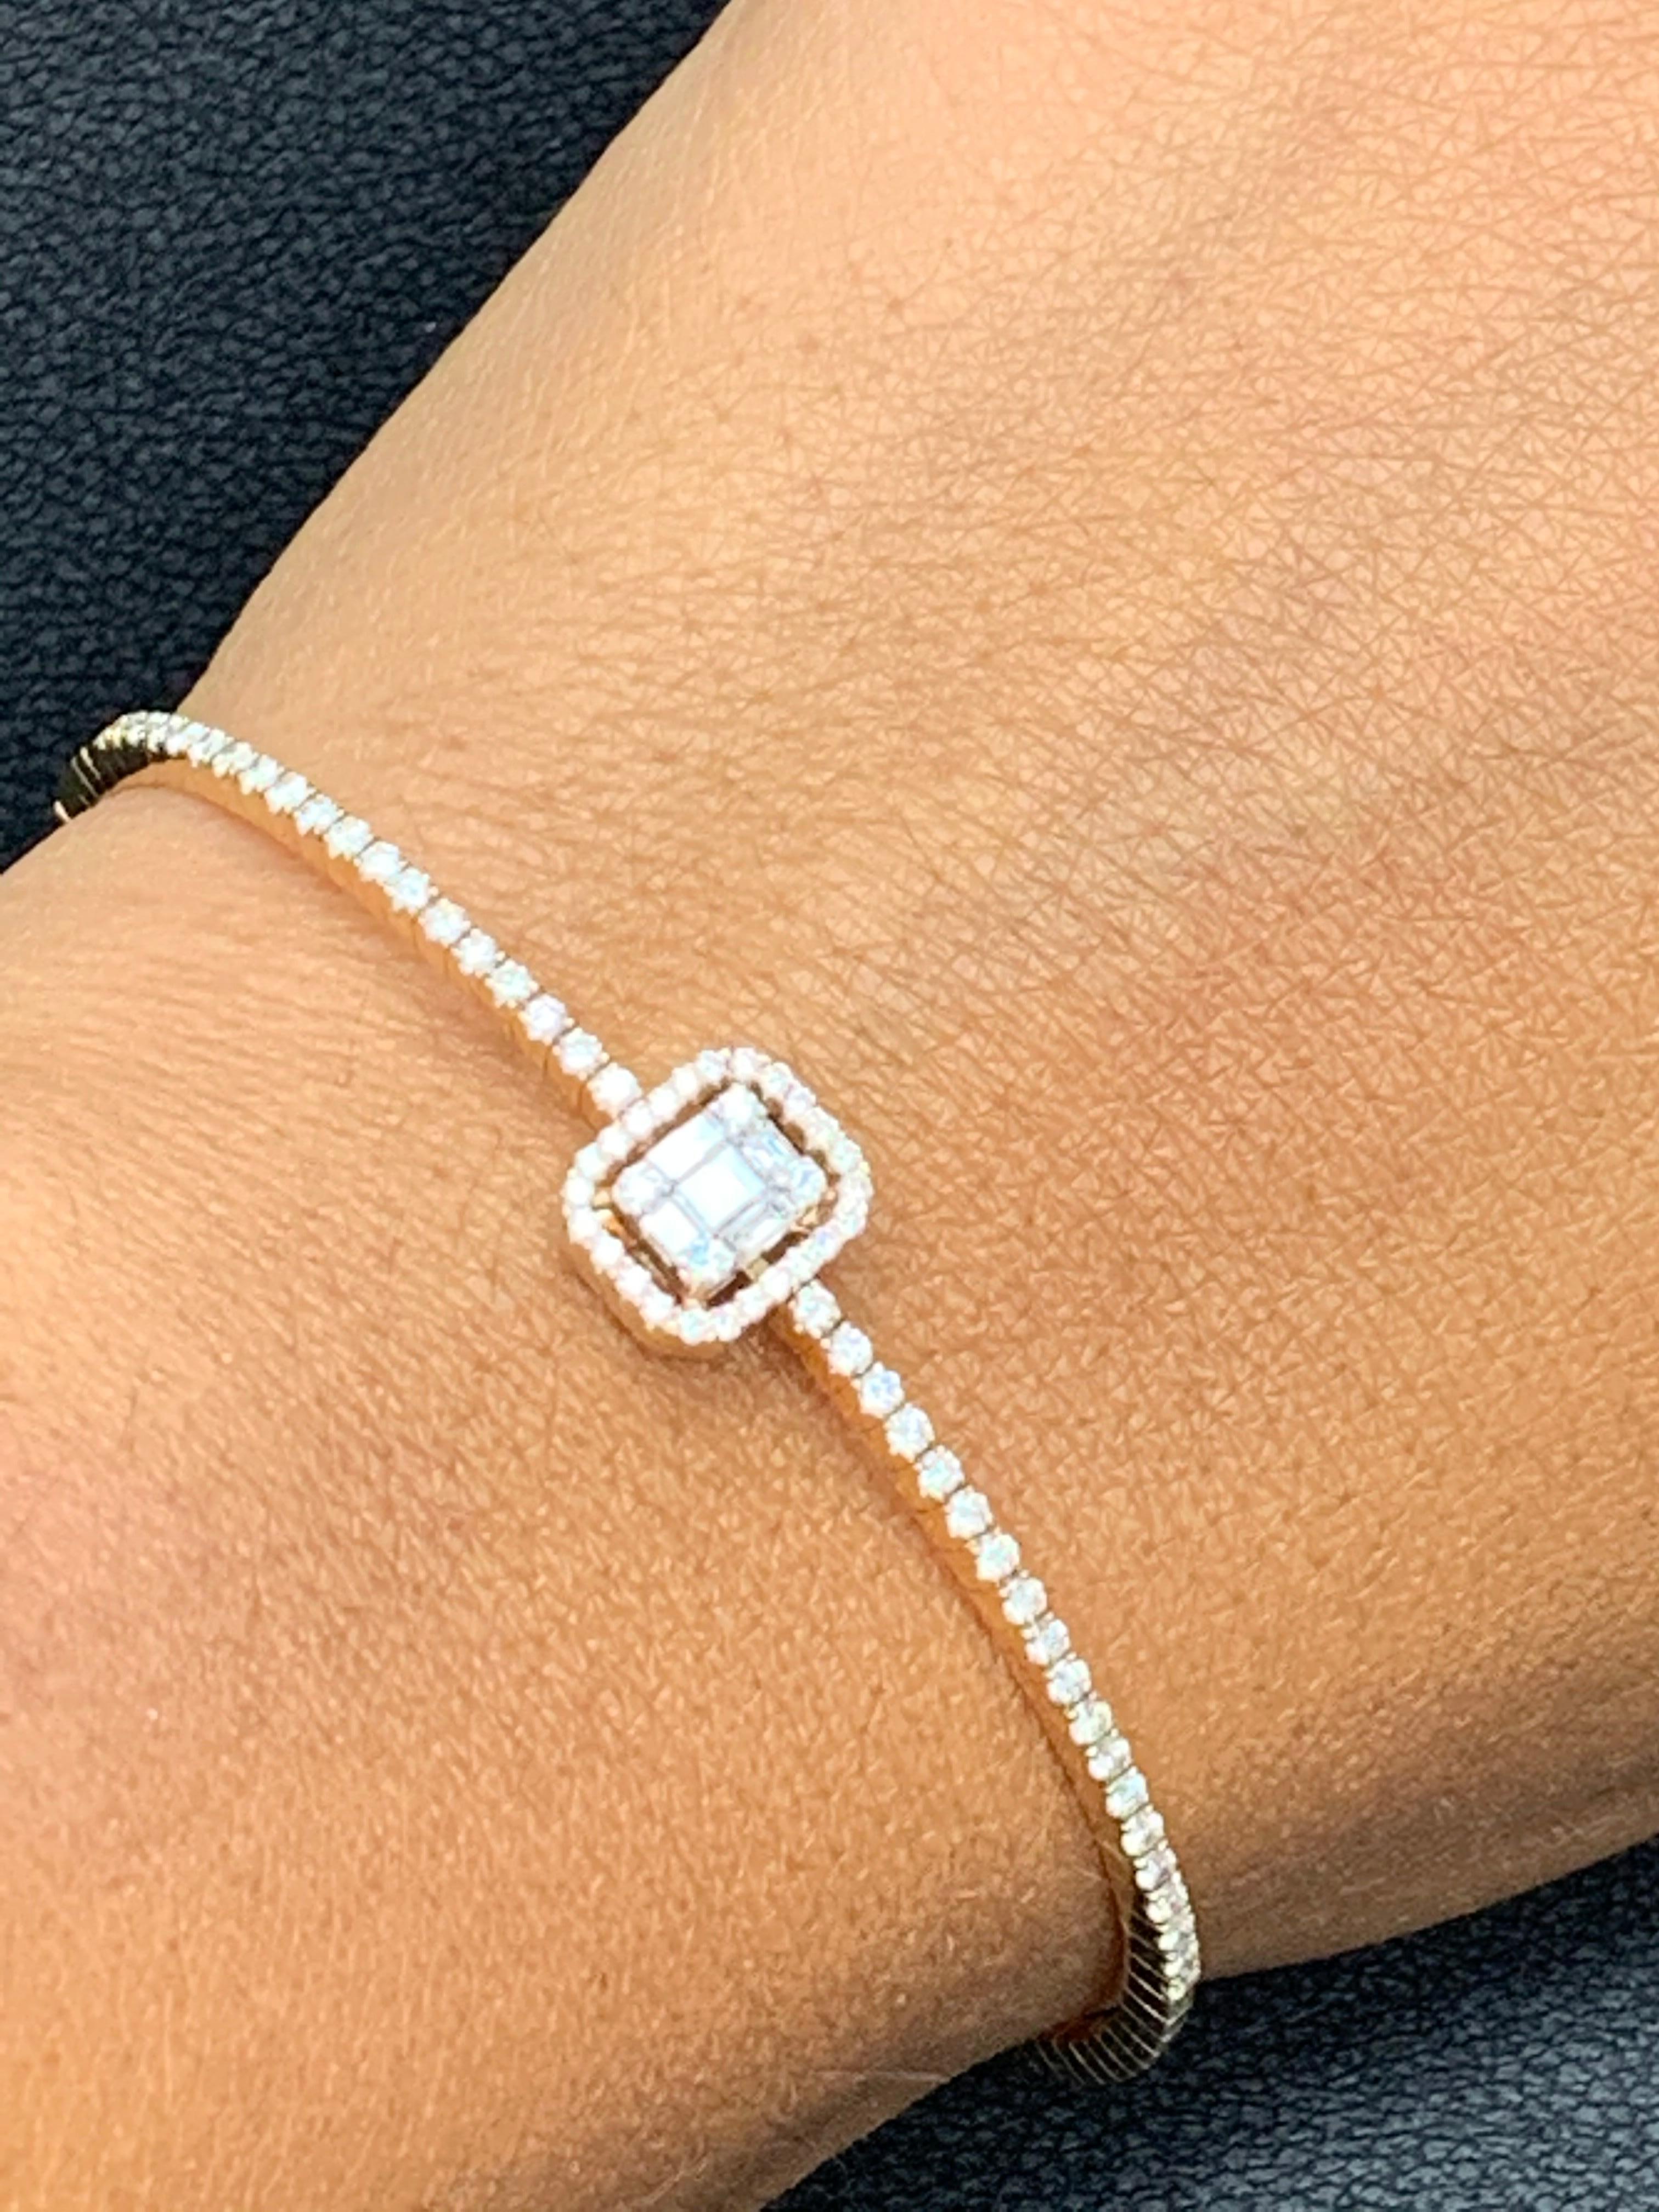 A chic and simple cuff bracelet with a Brilliant Baguette Diamonds weighing 0.21 carat in total surrounded by a row of diamonds in the center and on both sides of the design. Magnetic lock clasp makes it easy to wear. Made in 18 karat Rose